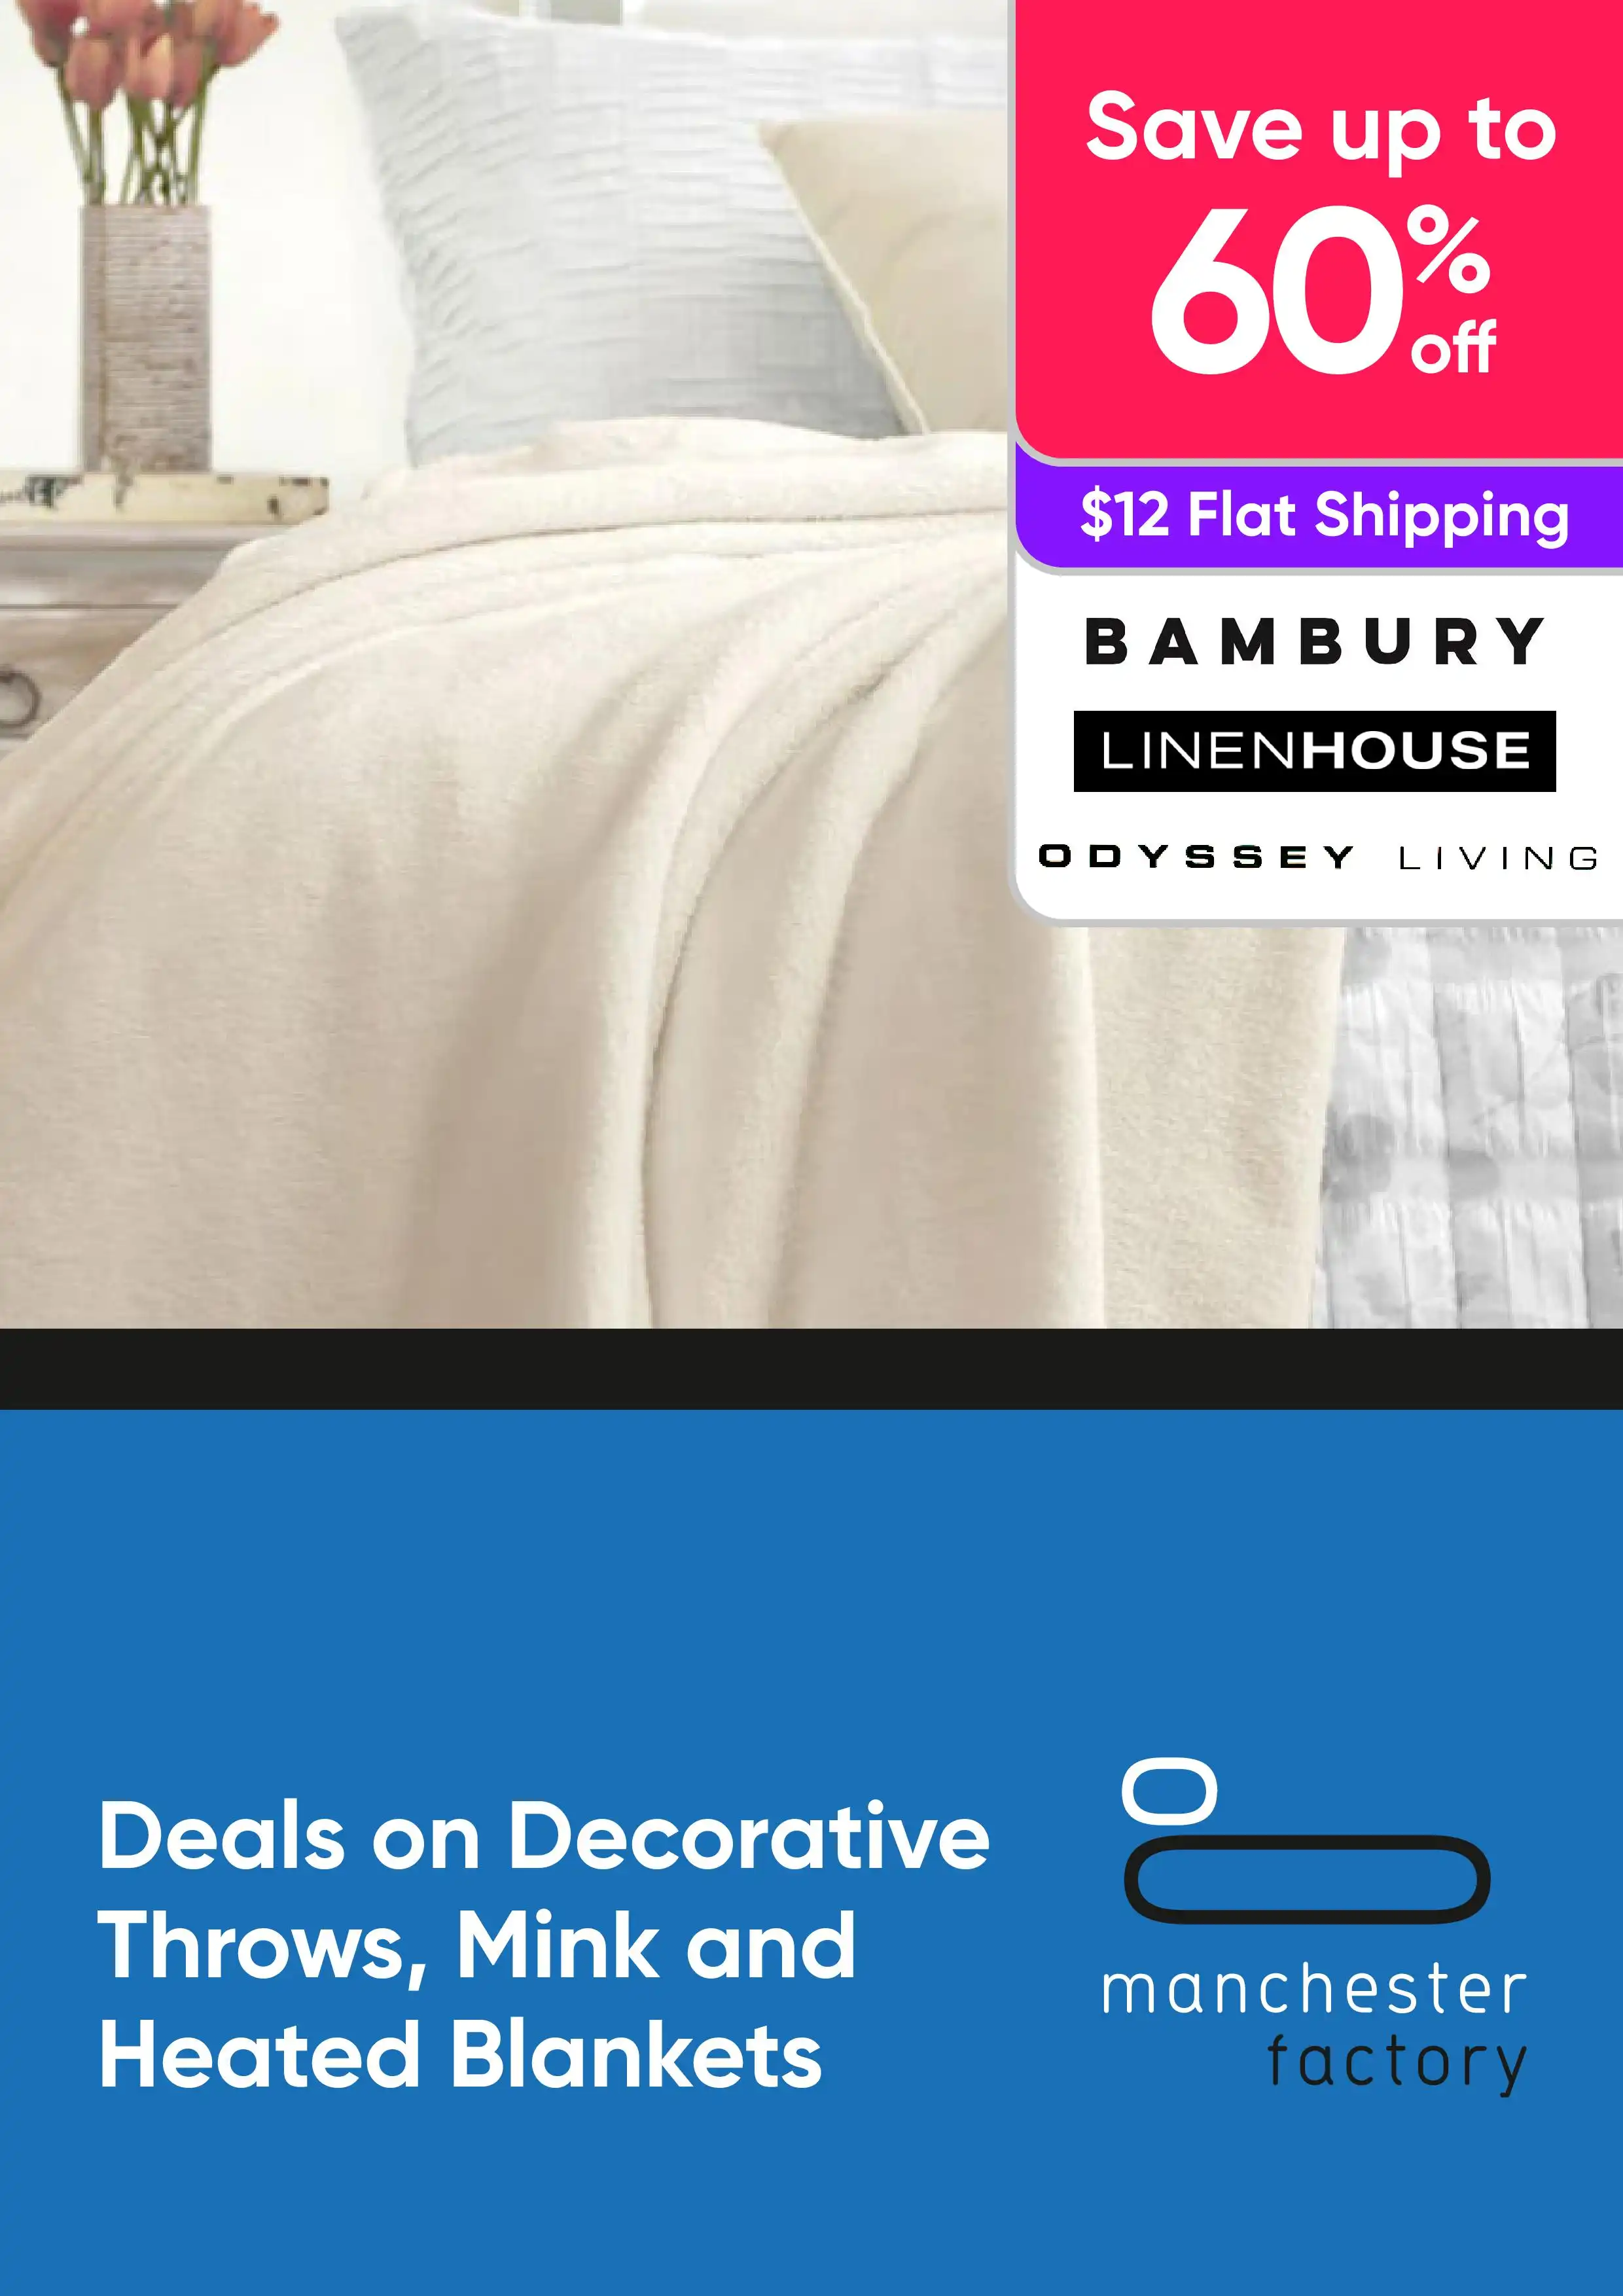 Save up to 60% on Decorative Throws, Mink and Heated Blankets